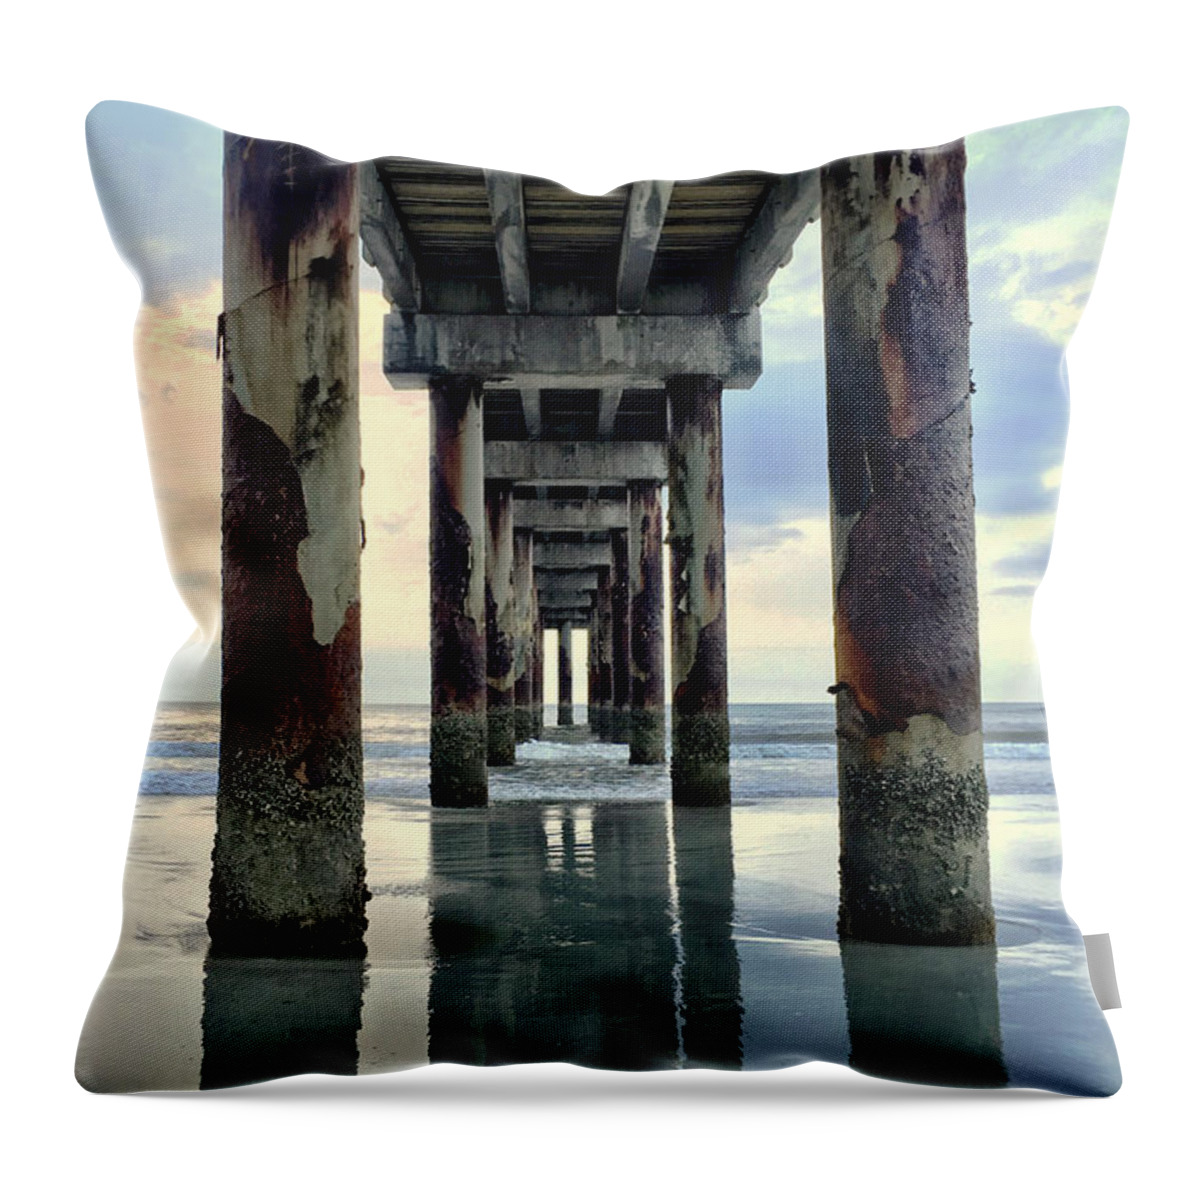 Staugusttine Throw Pillow featuring the photograph Dimensions by LeeAnn Kendall